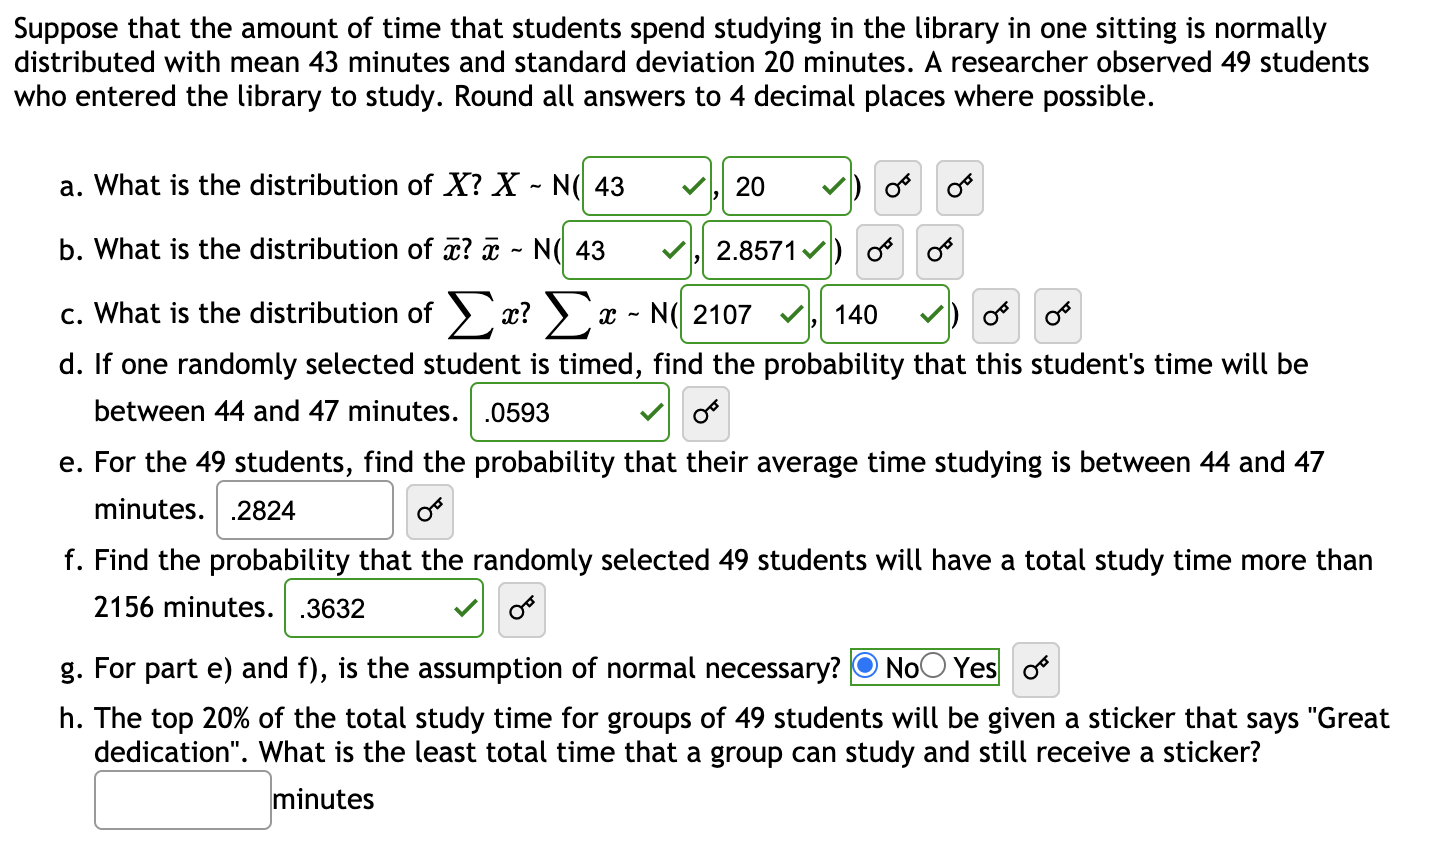 Suppose that the amount of time that students spend studying in the library in one sitting is normally
distributed with mean 43 minutes and standard deviation 20 minutes. A researcher observed 49 students
who entered the library to study. Round all answers to 4 decimal places where possible.
a. What is the distribution of X? X - N( 43
20
b. What is the distribution of x? ¤ - N( 43
2.8571 v) o
c. What is the distribution of æ? x - N( 2107
d. If one randomly selected student is timed, find the probability that this student's time will be
140
between 44 and 47 minutes. .0593
e. For the 49 students, find the probability that their average time studying is between 44 and 47
minutes. .2824
f. Find the probability that the randomly selected 49 students will have a total study time more than
2156 minutes. .3632
g. For part e) and f), is the assumption of normal necessary?
NoO Yes o
h. The top 20% of the total study time for groups of 49 students will be given a sticker that says "Great
dedication". What is the least total time that a group can study and still receive a sticker?
minutes
